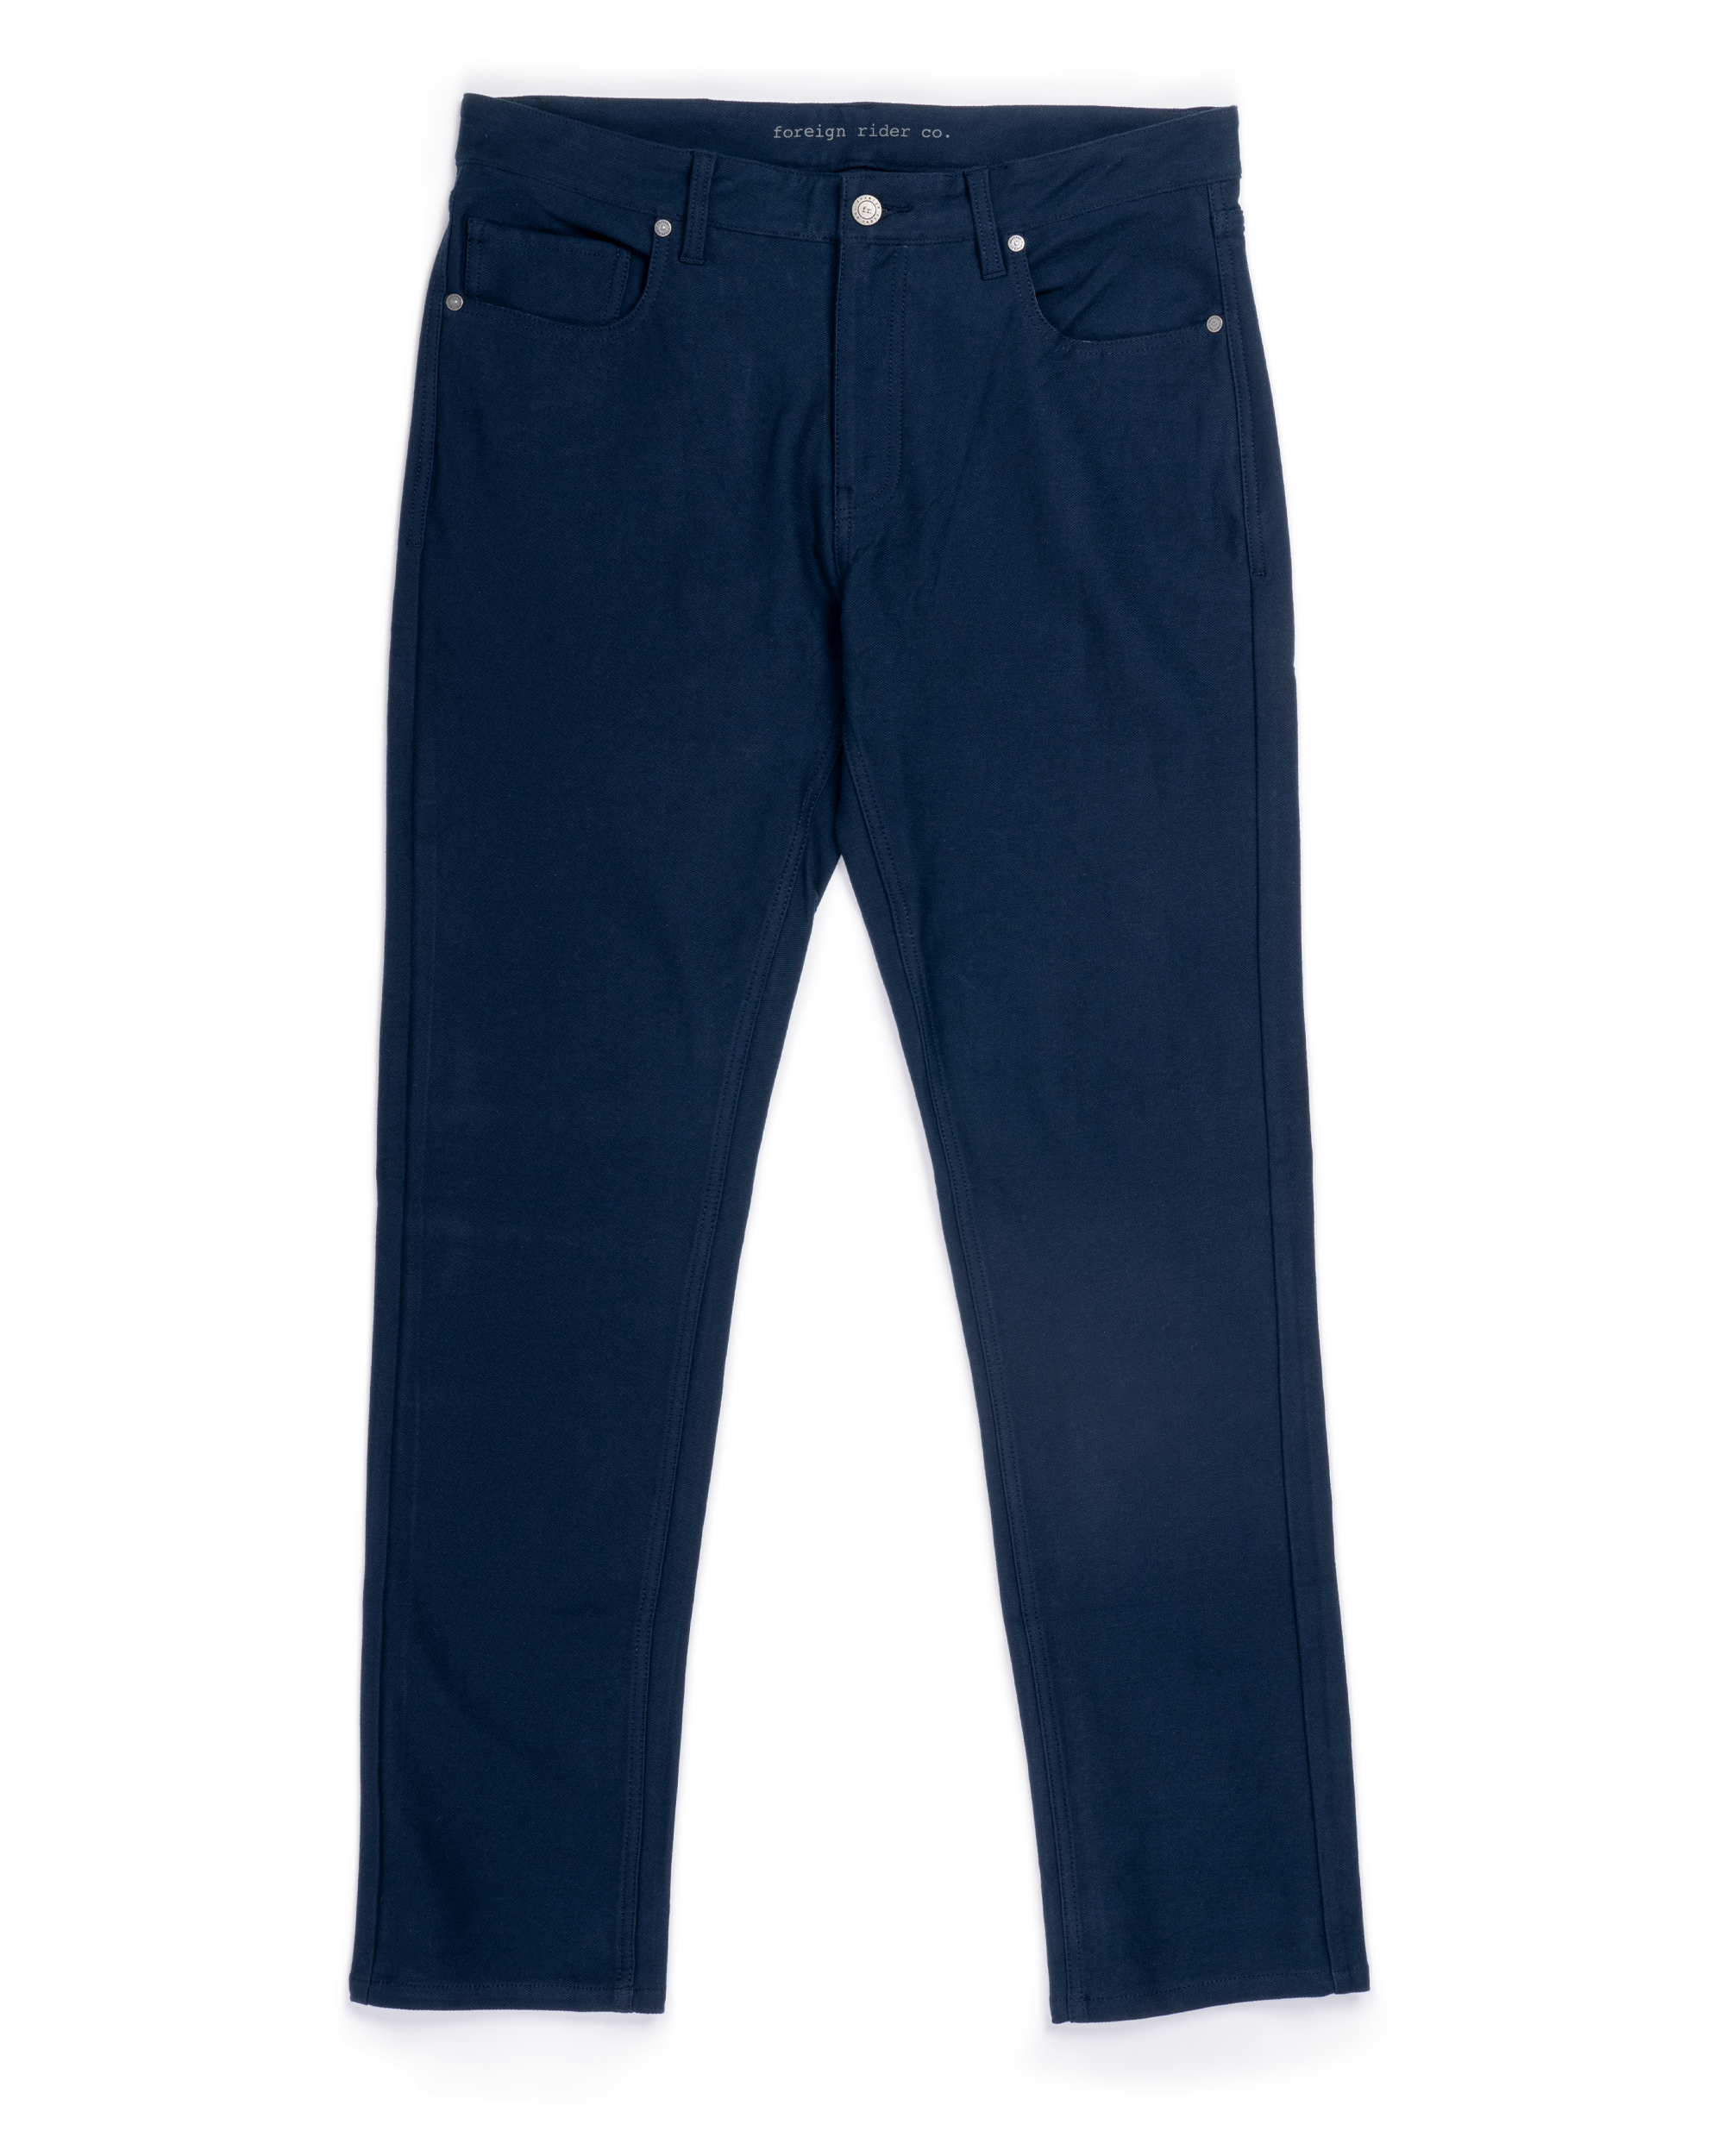 5 Pocket Organic Cotton Pant Navy - Foreign Rider Co.